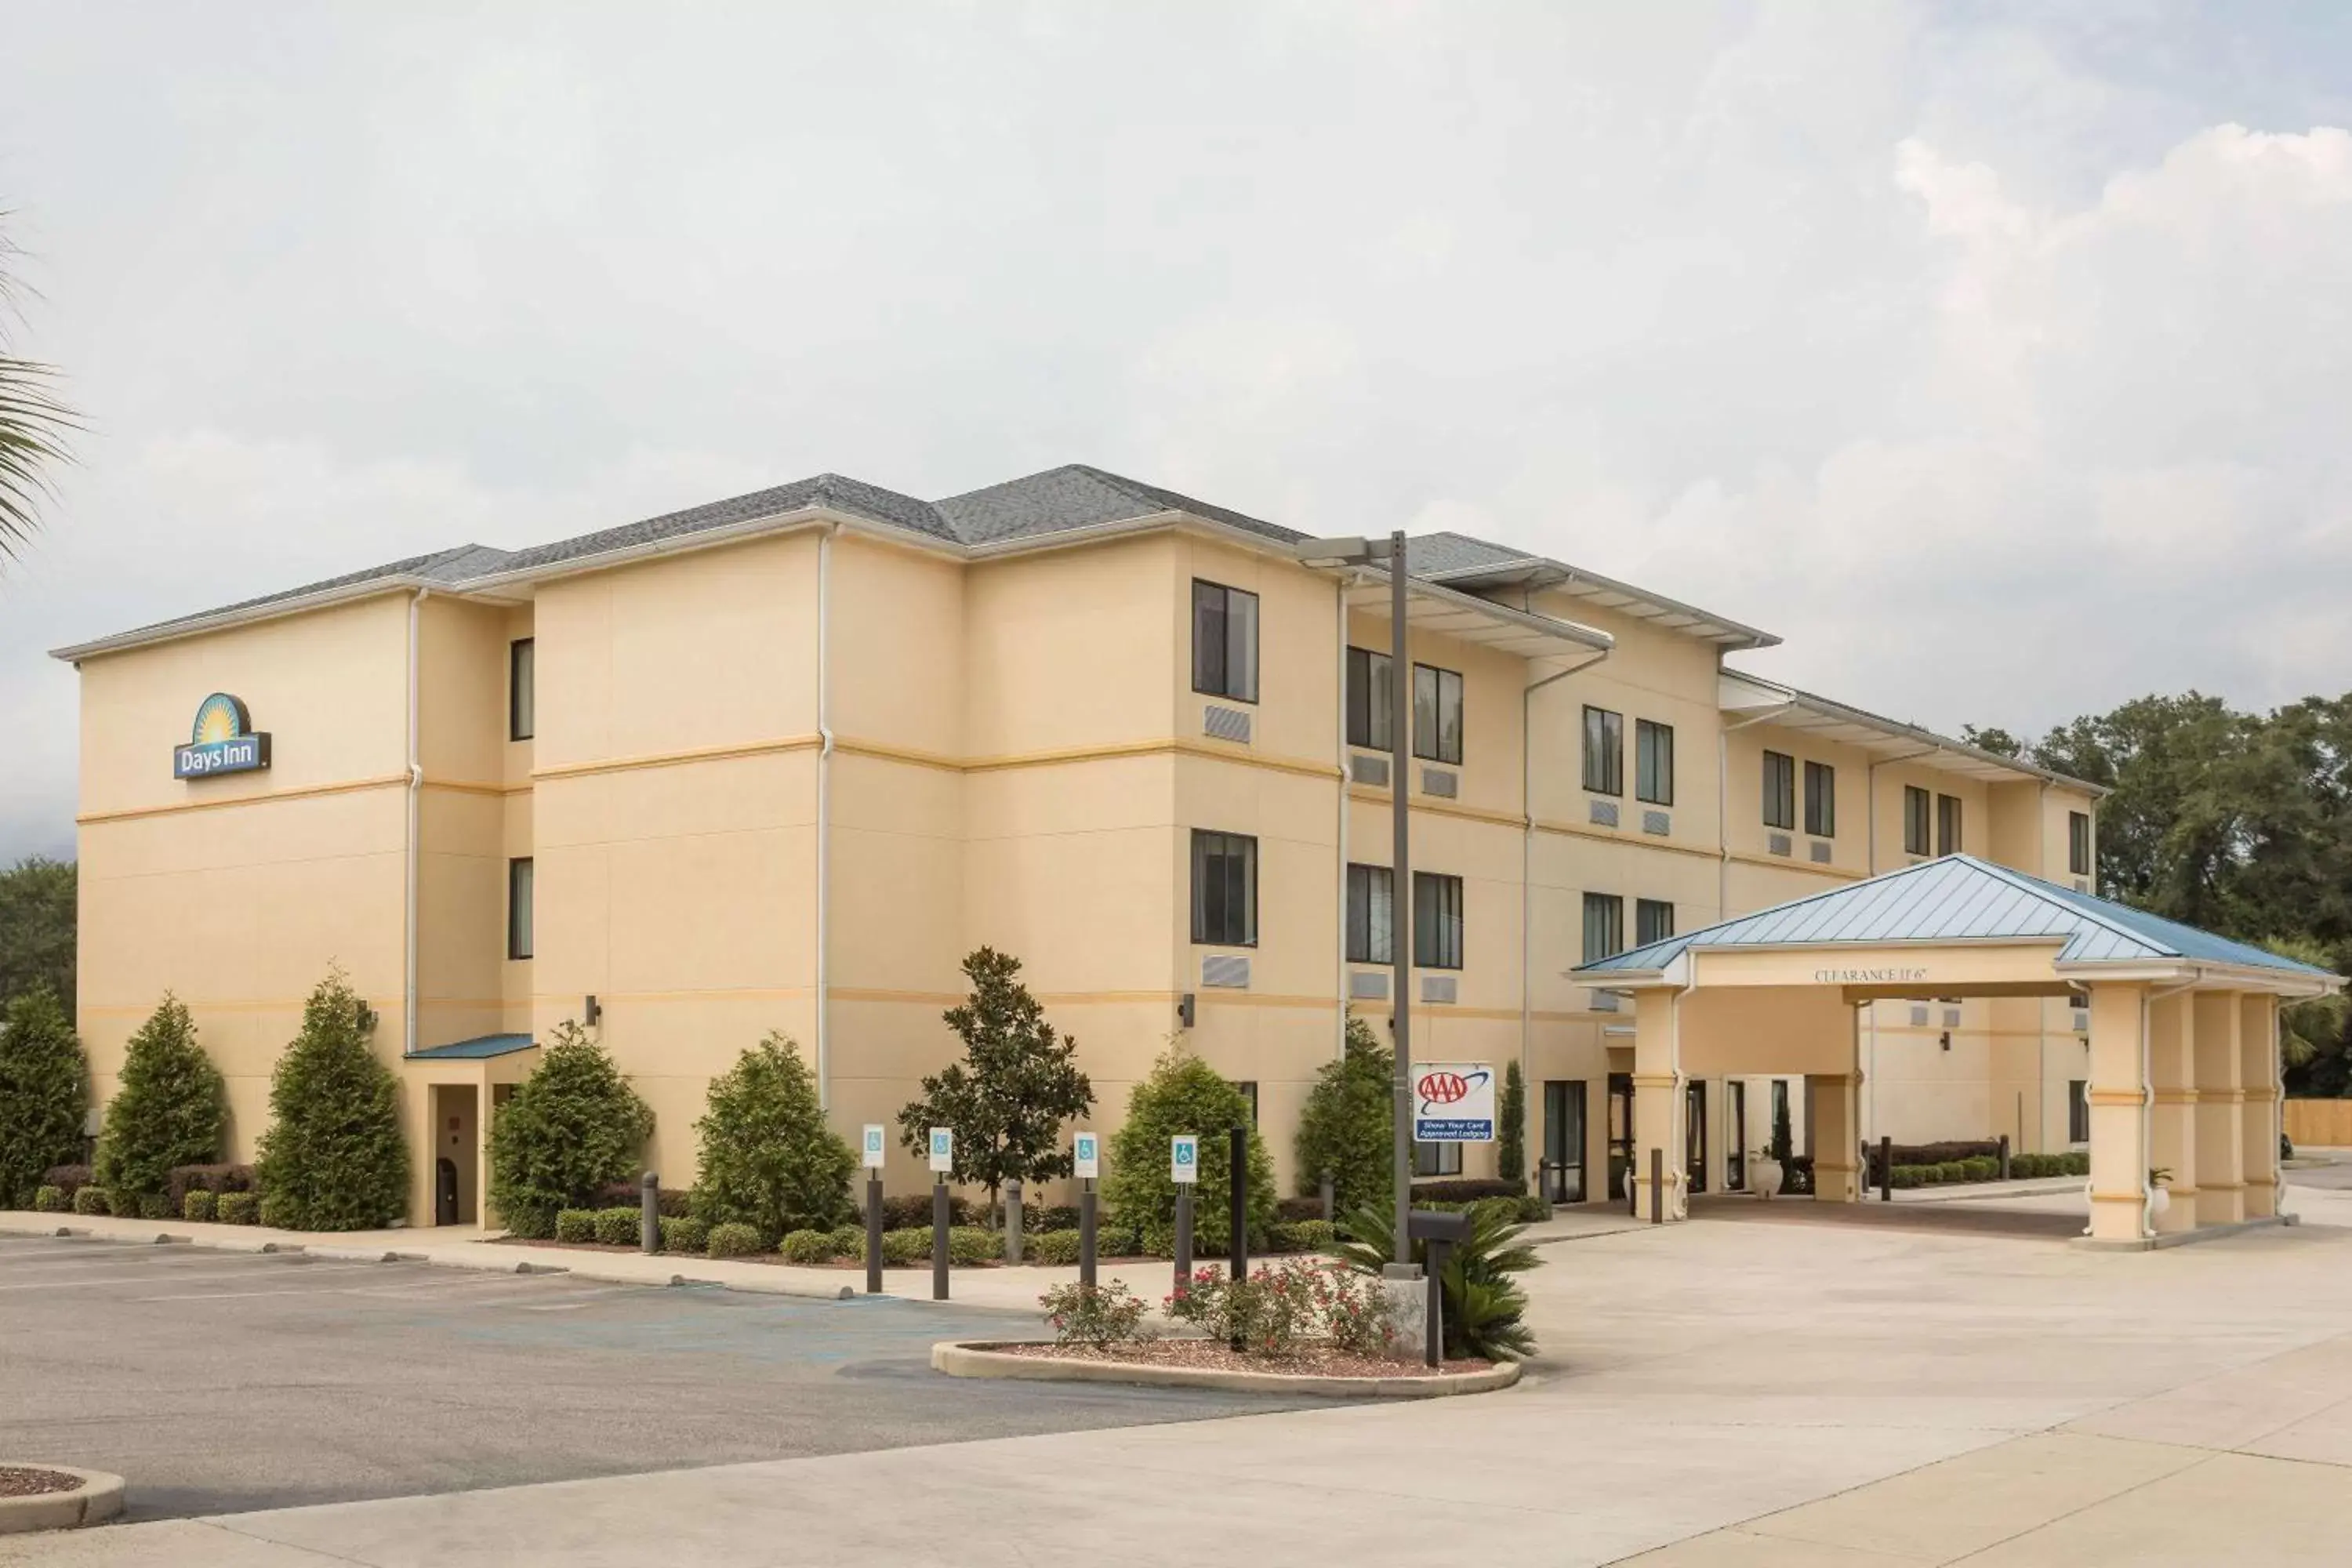 Property Building in Days Inn by Wyndham Semmes Mobile